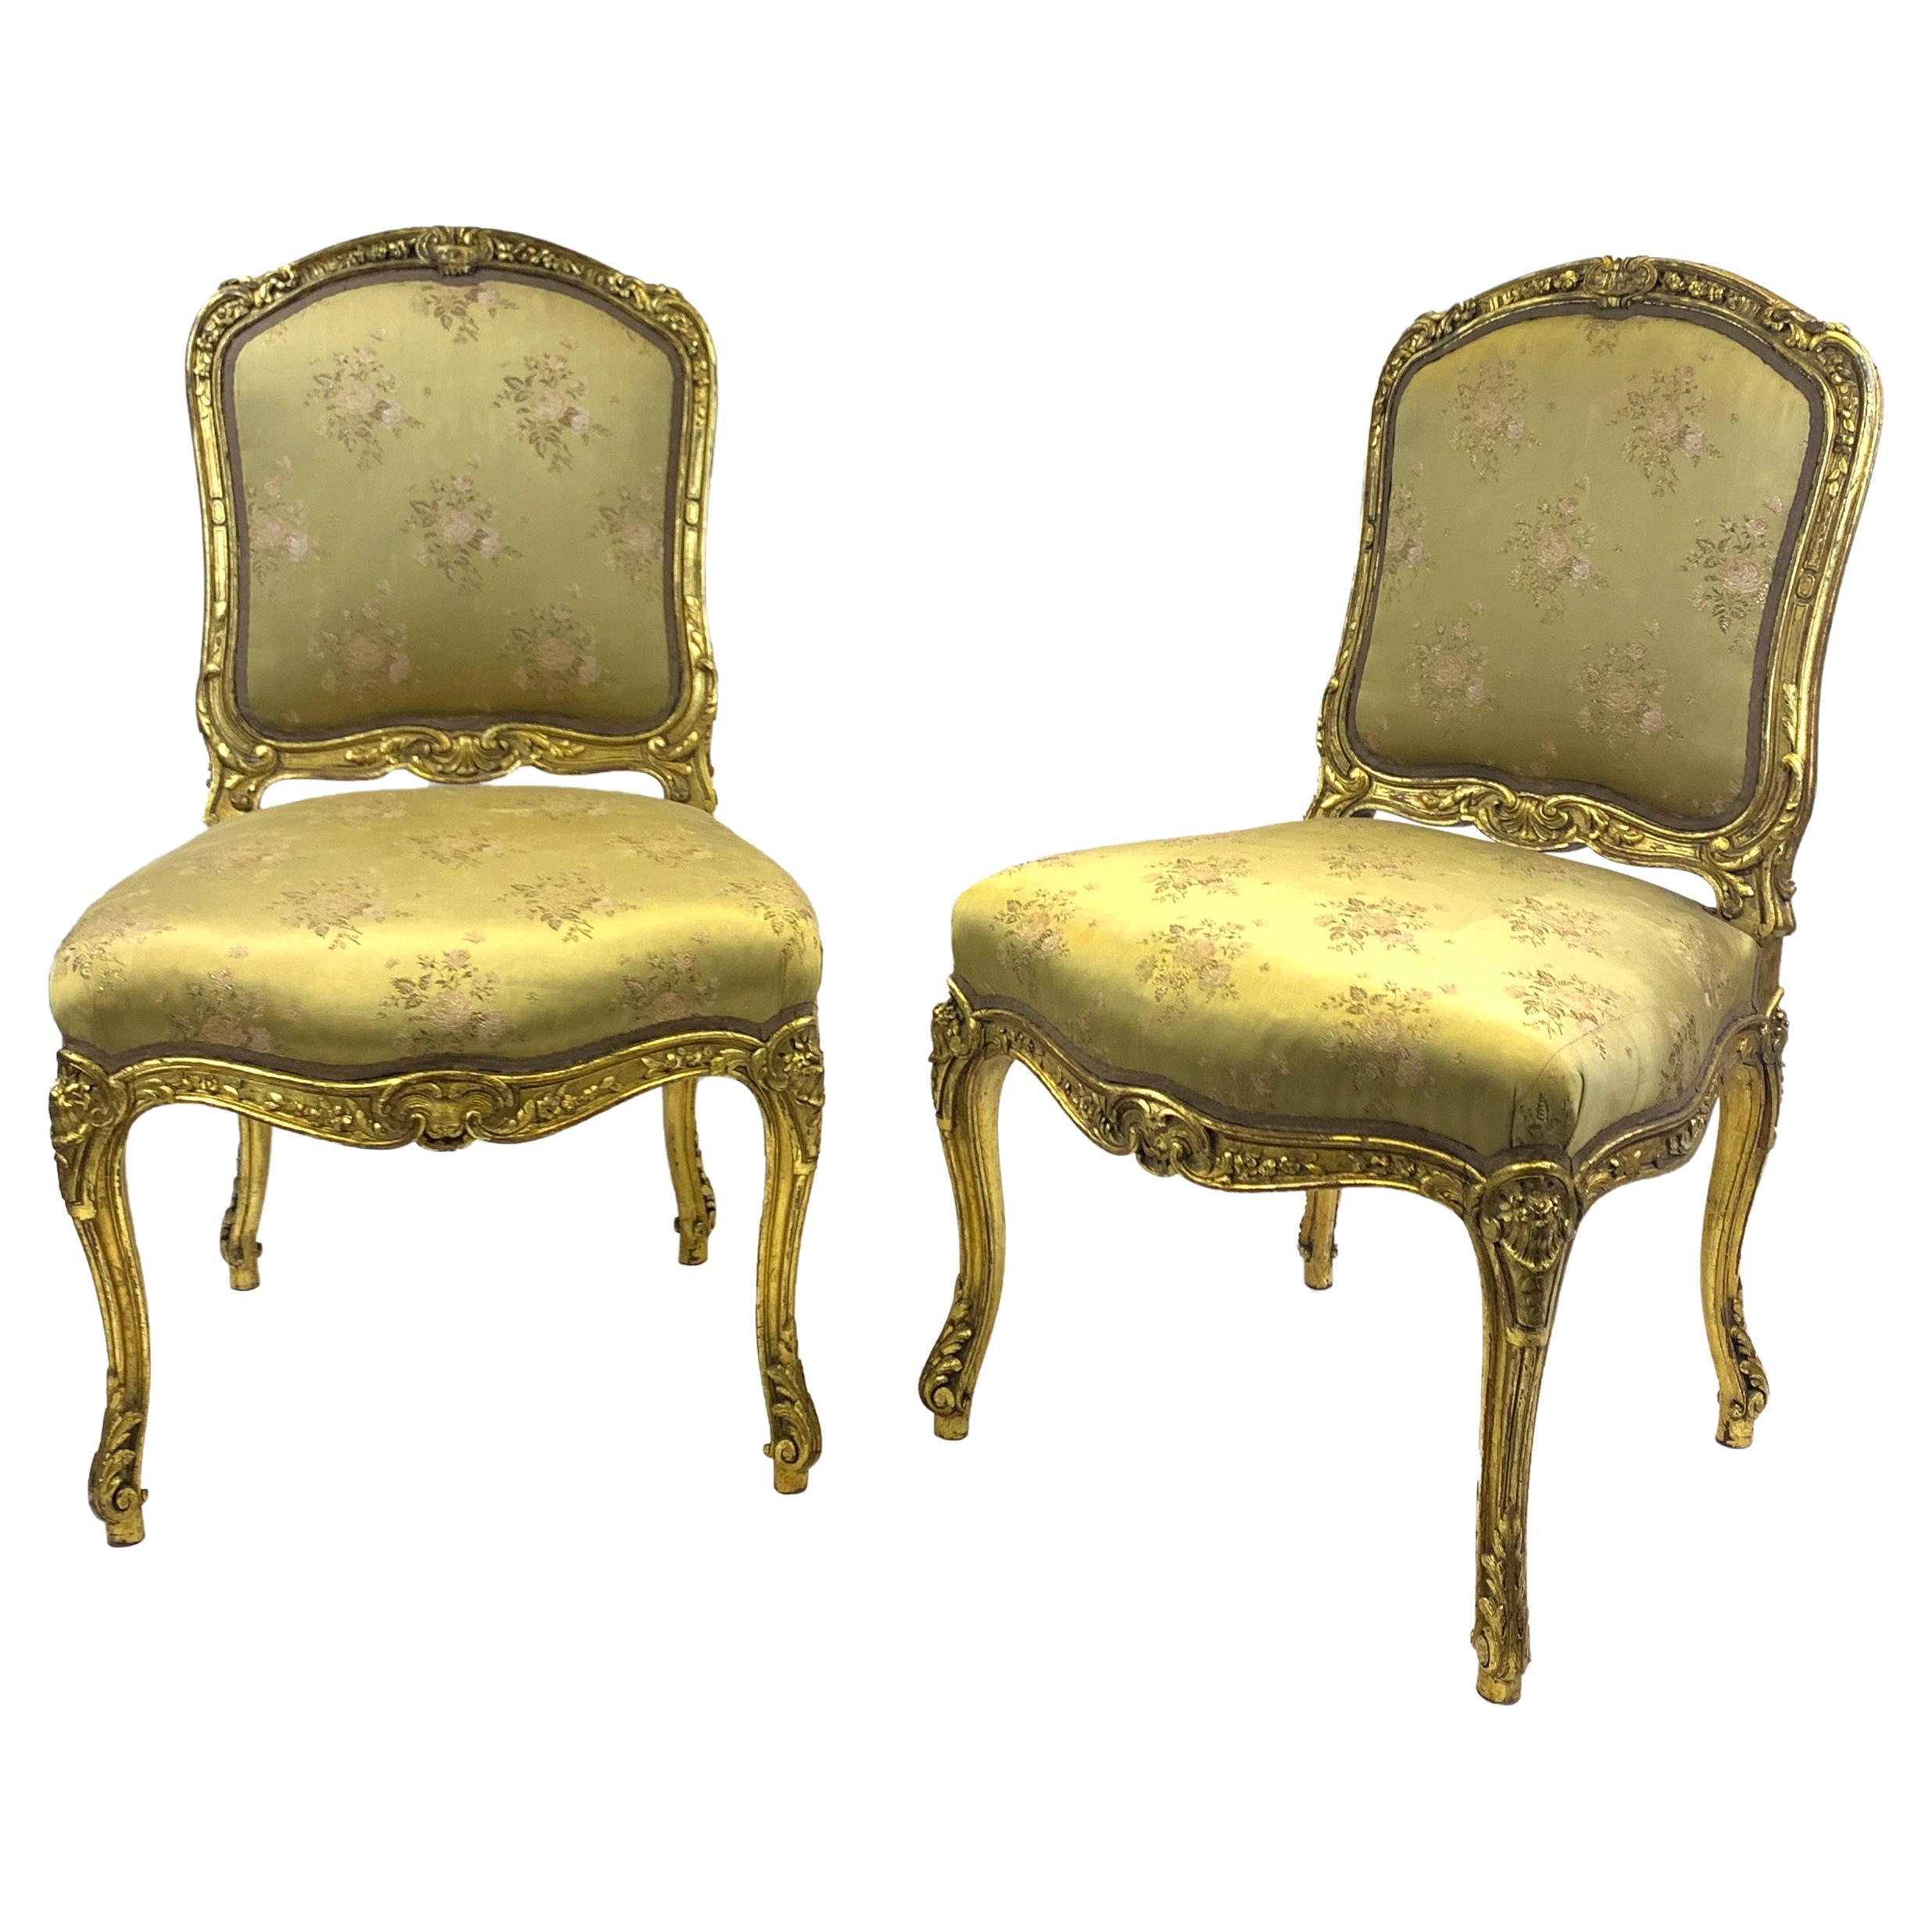 Pair of Rococo Style Gilt Wood Side Chairs, Late 19th Century